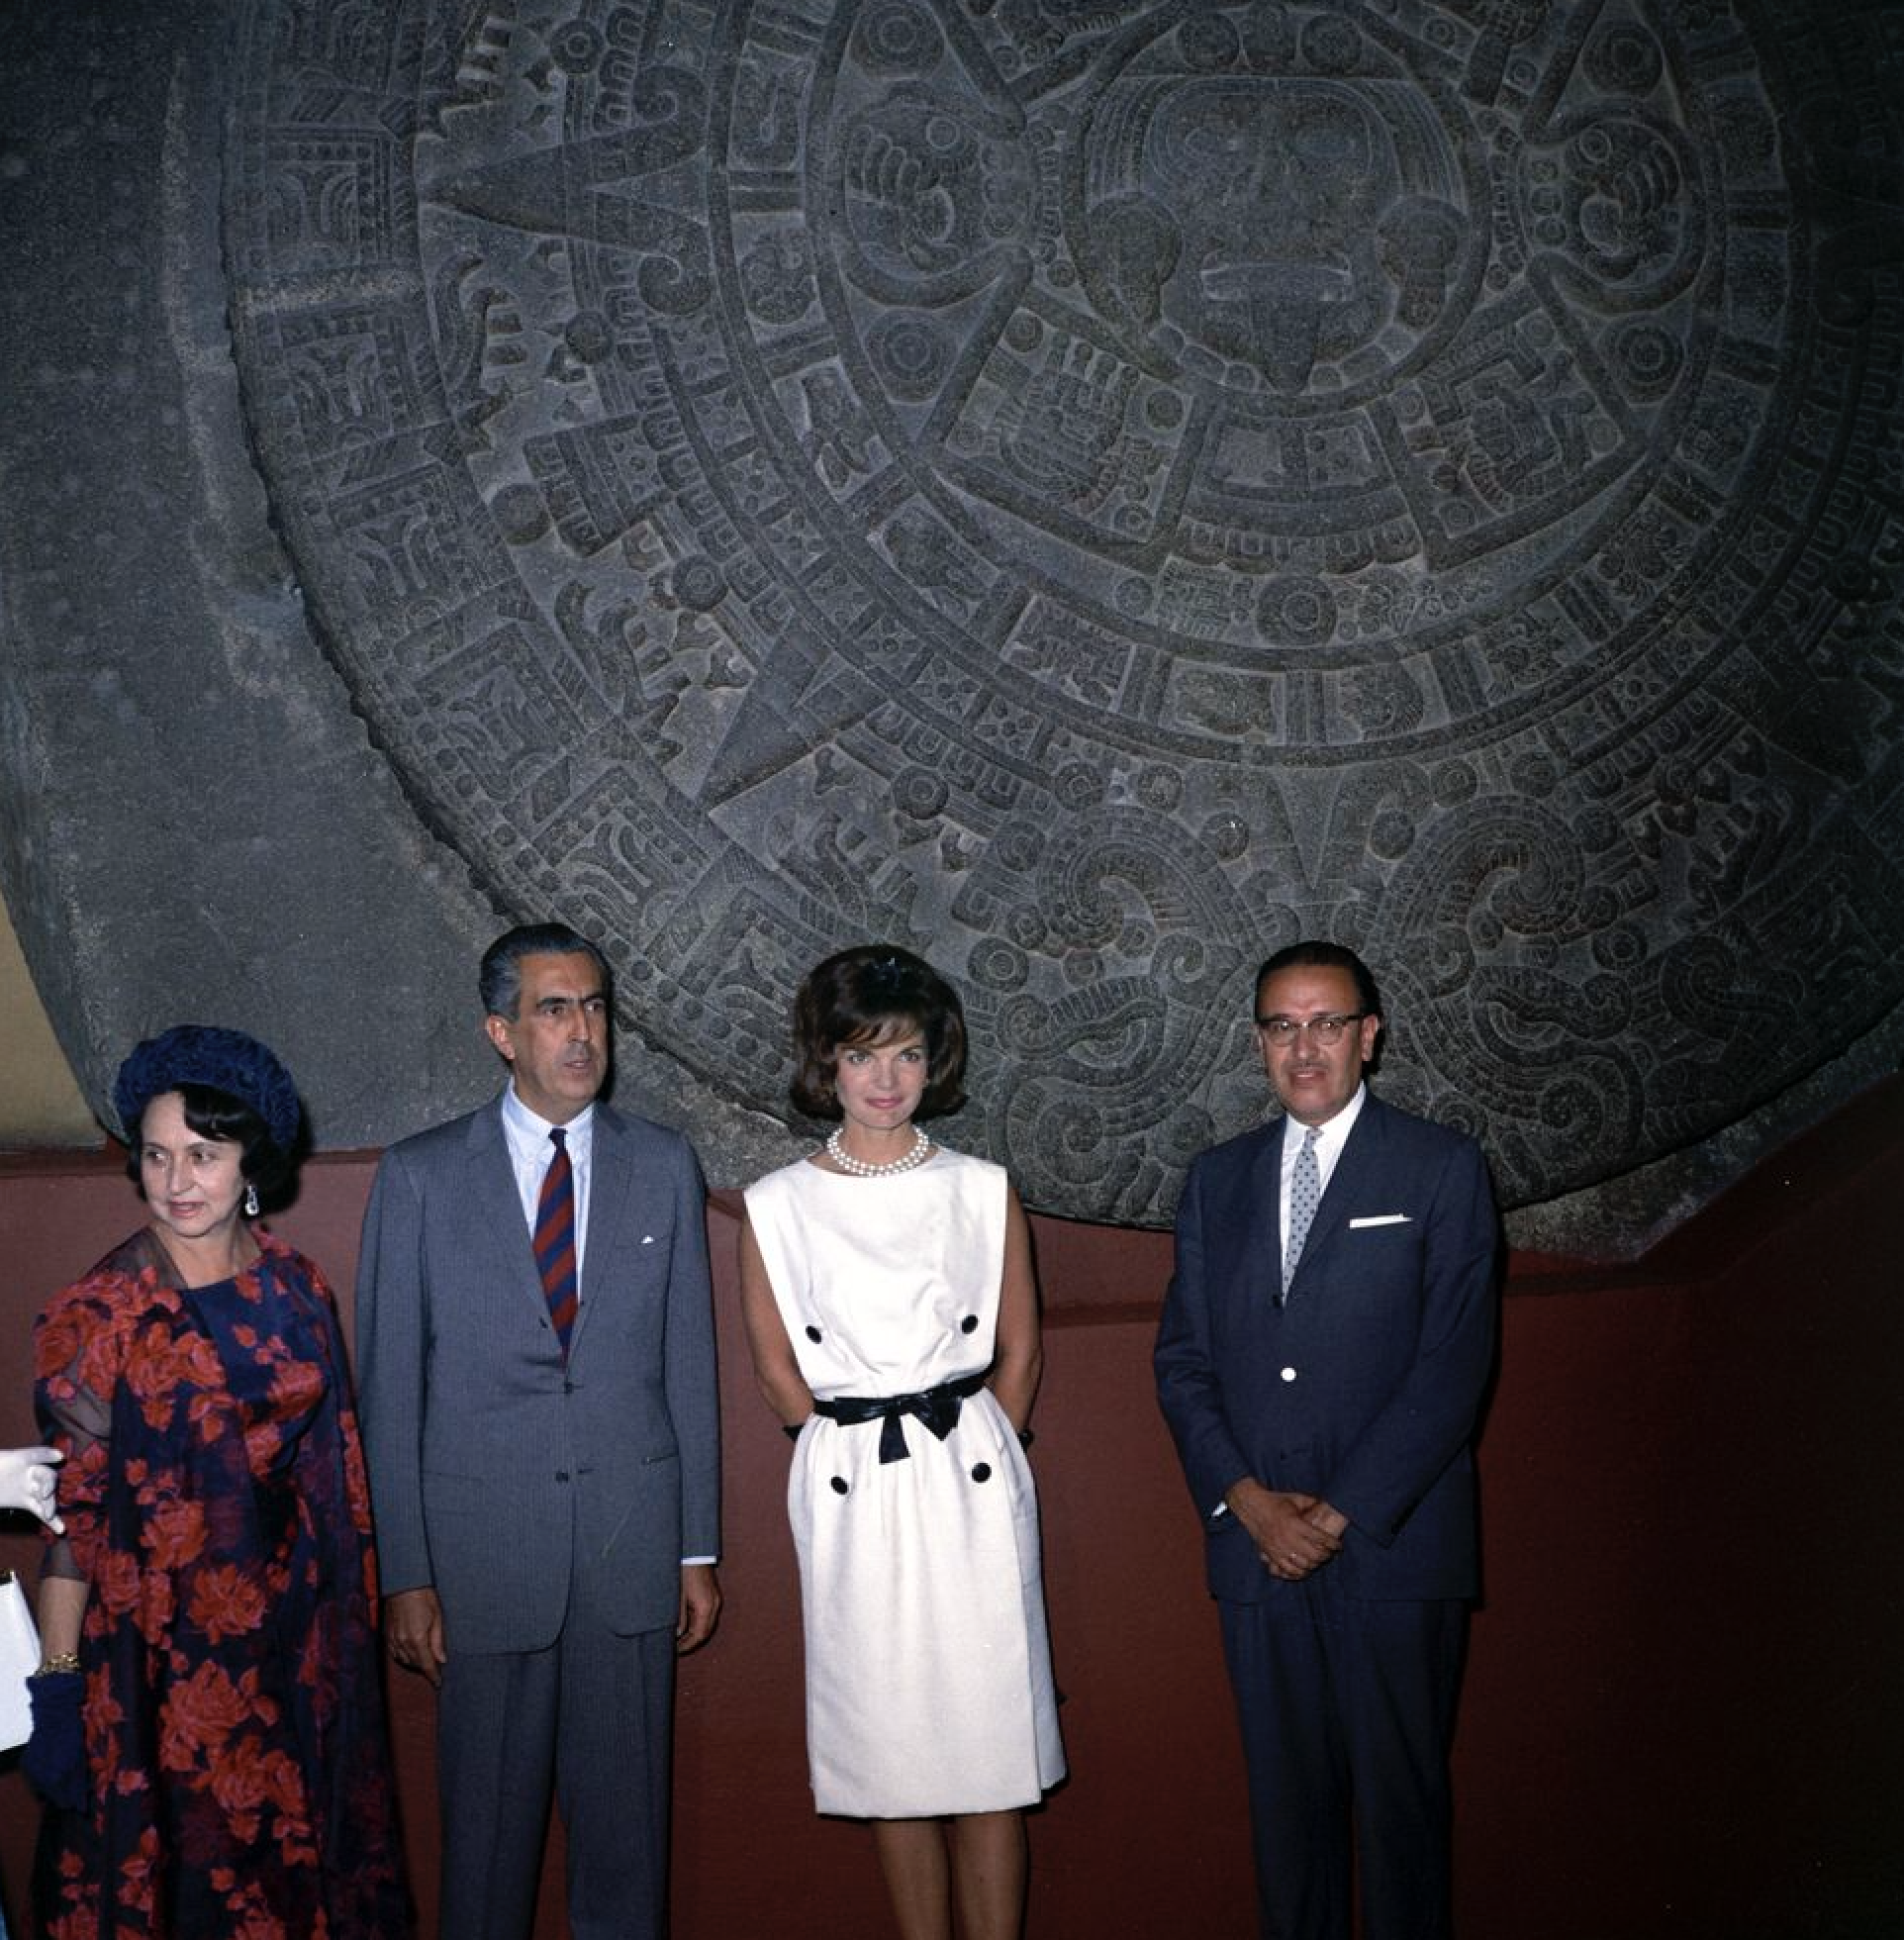 First Lady Jacqueline Kennedy poses in front of the Piedra del Sol (Aztec calendar, Sun Stone) during a tour of the Museo Nacional de Antropología (National Museum of Anthropology) of the Instituto Nacional de Antropología e Historia (National Institute of Anthropology and History) in Mexico City.